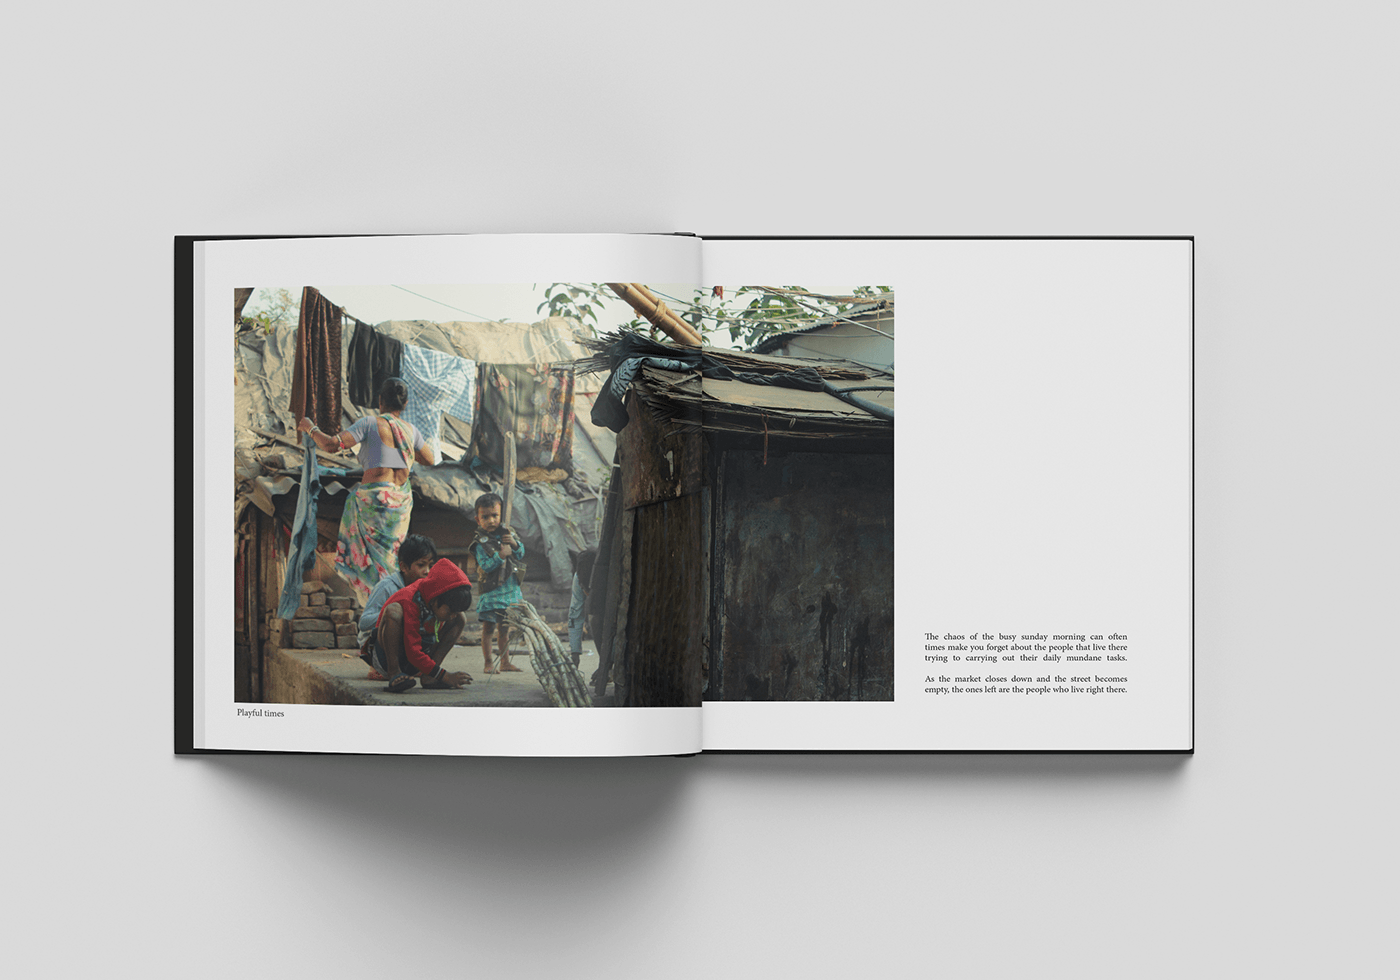 street photography Photography  coffeetablebook photobook publication design Layout spreads editorial book InDesign